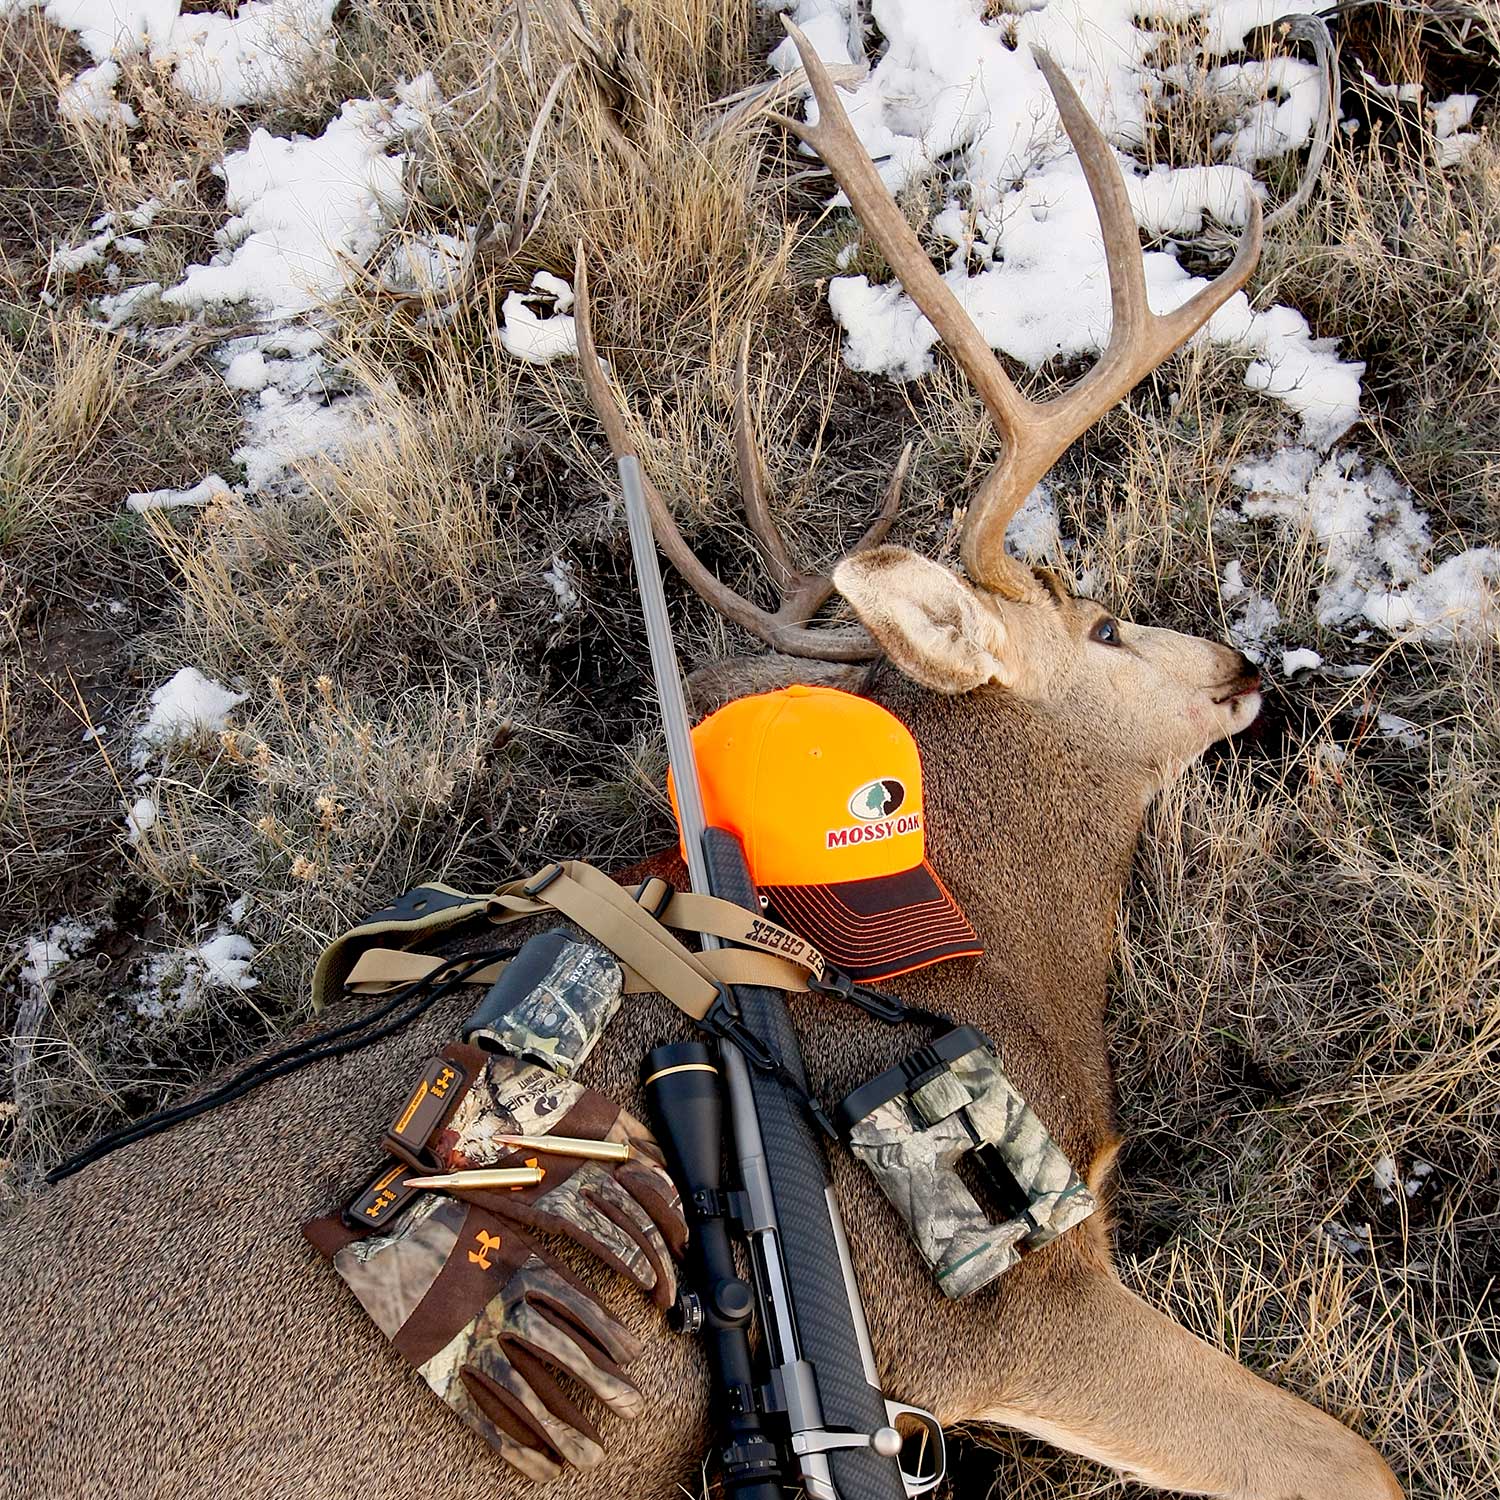 a mature muley buck with hunting gear on it